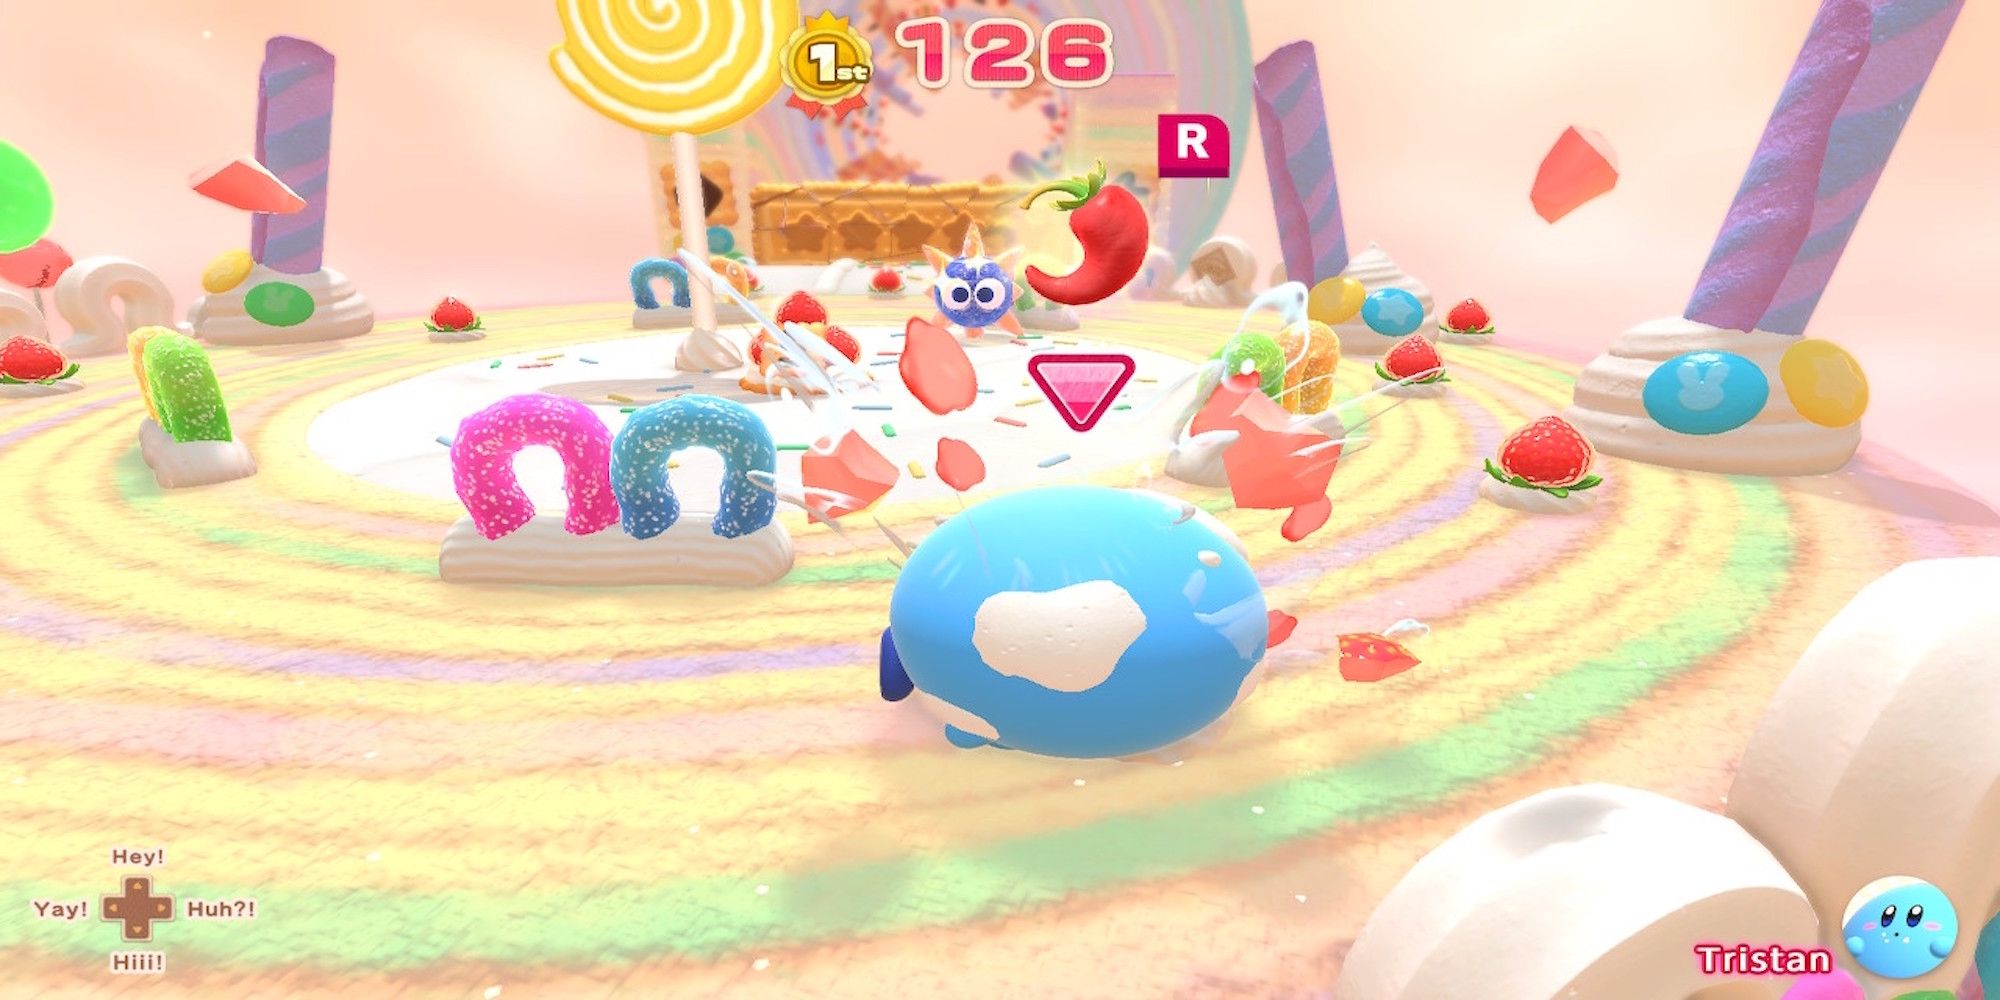 Playing a race in Kirby's Dream Buffet